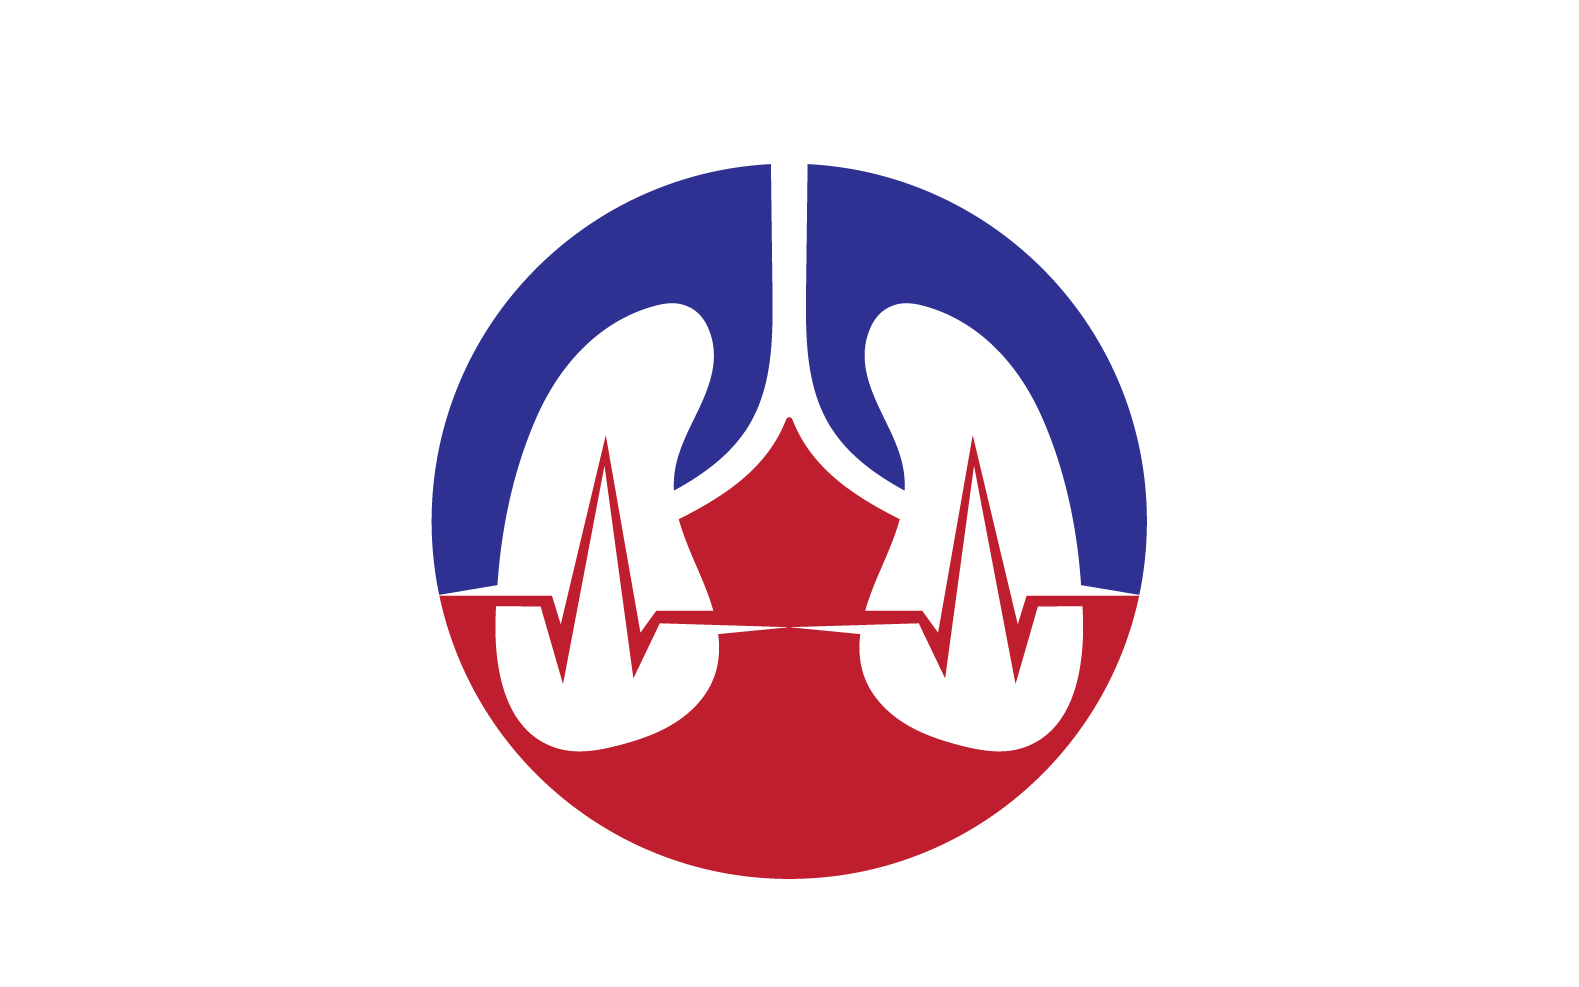 Health lungs logo and symbol vector v25